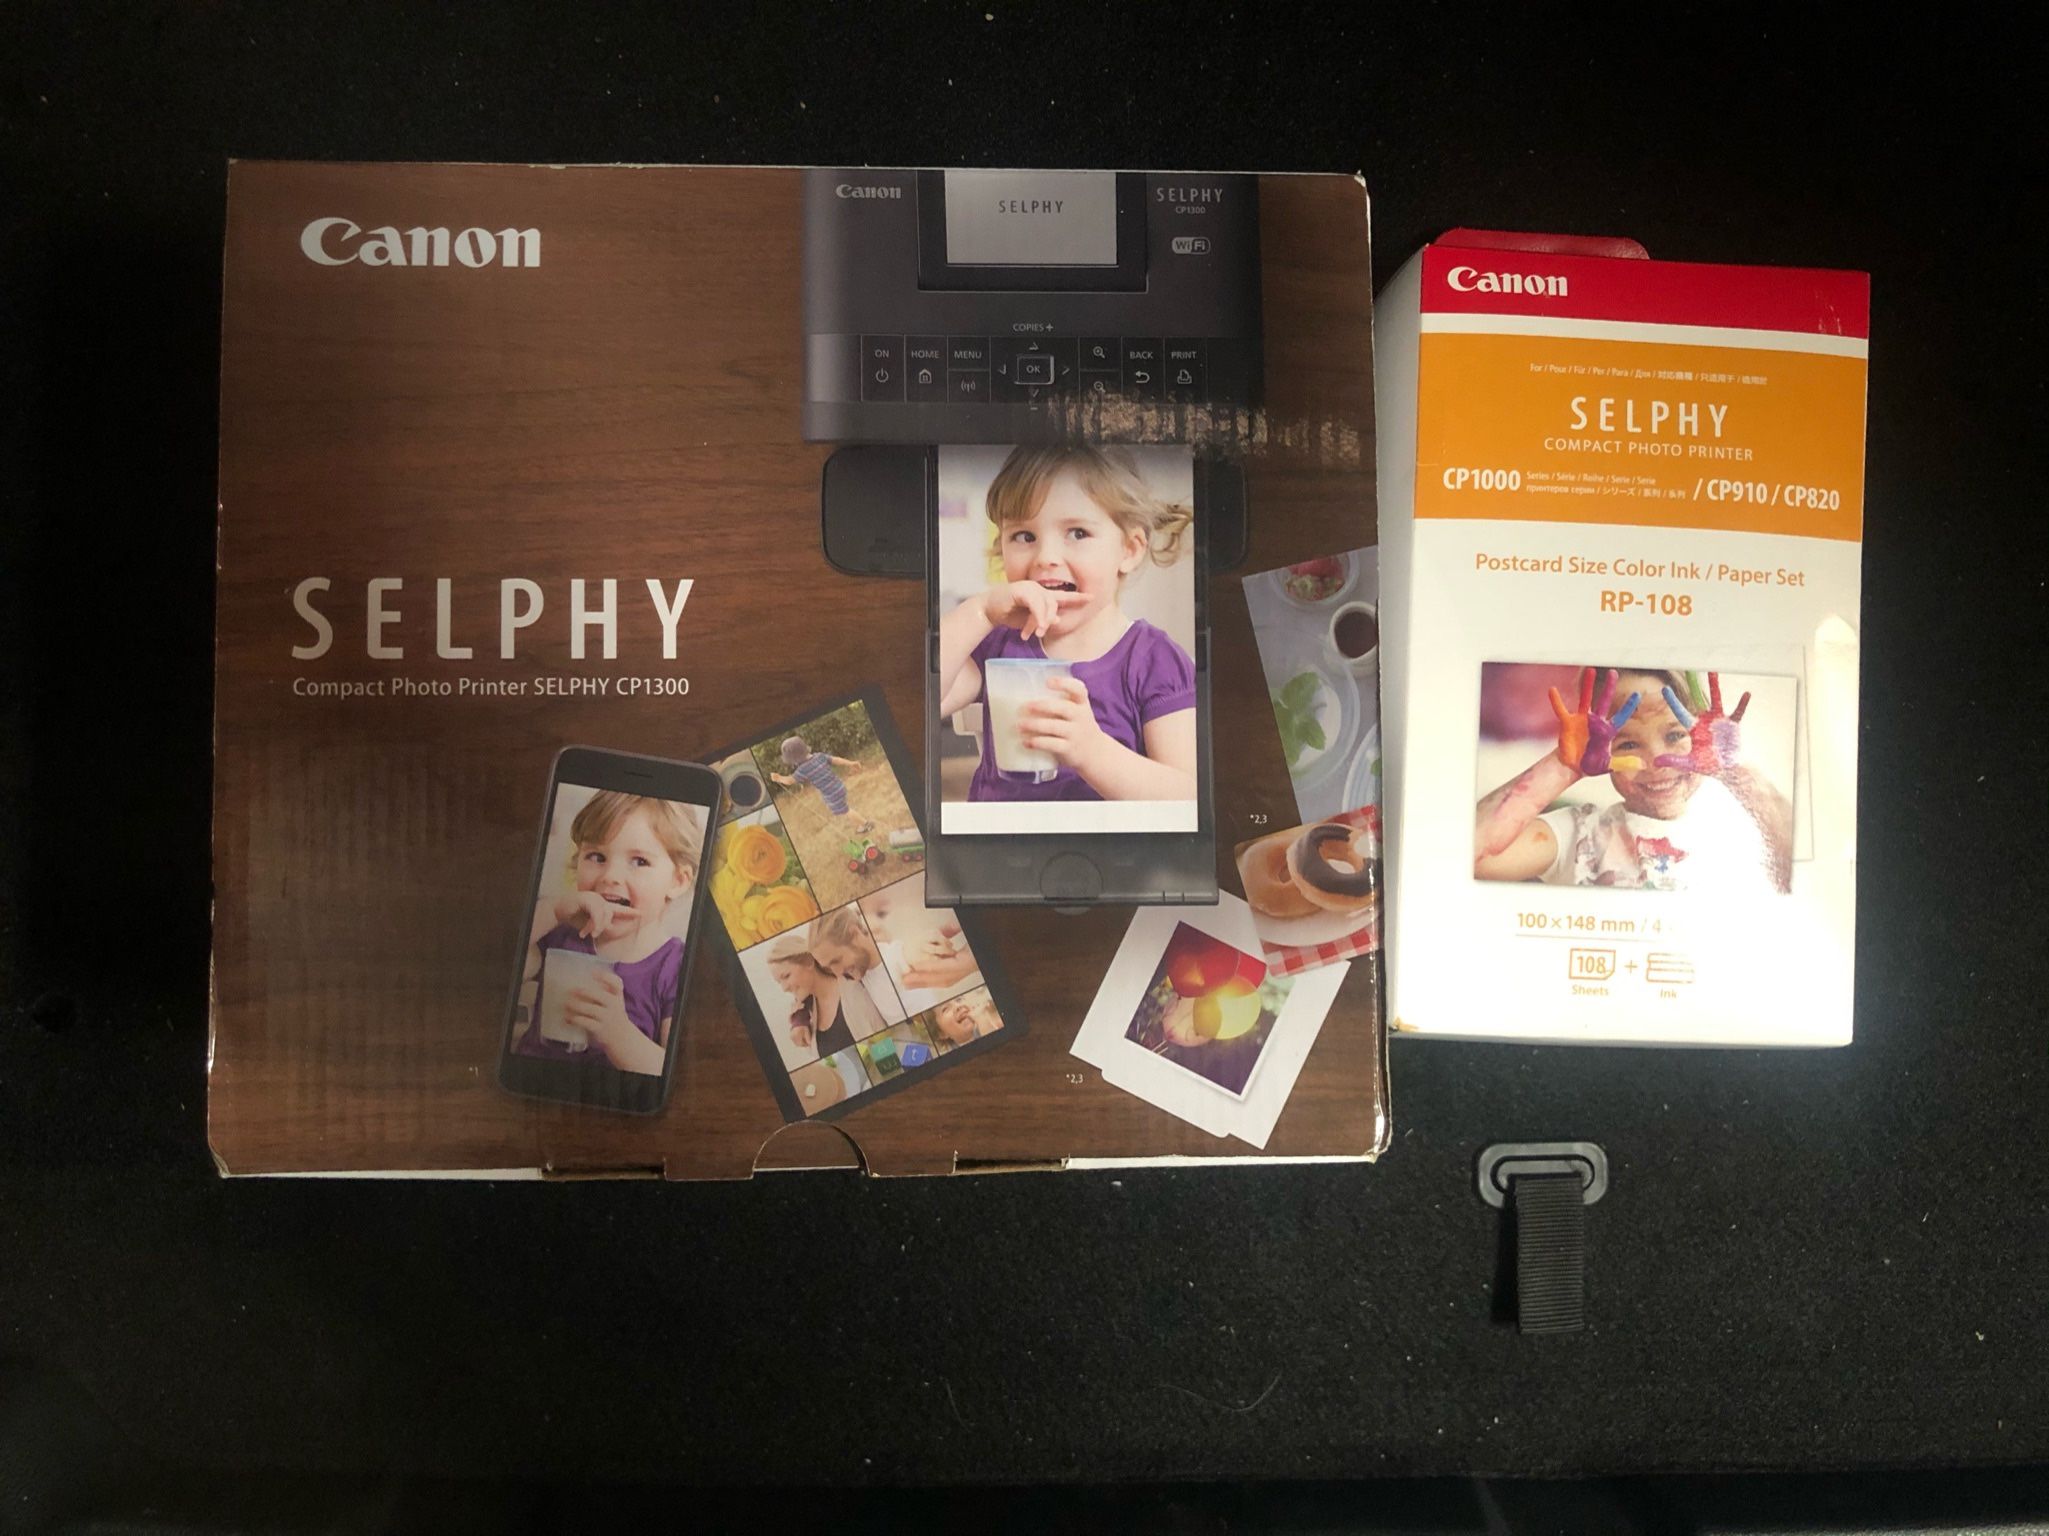 ❇️ Bundle - Canon - SELPHY CP1300 Wireless Compact Photo Printer - Black and Canon RP-108 Color Ink and Paper Set - Multicolor ❇️ Brand New ❇️